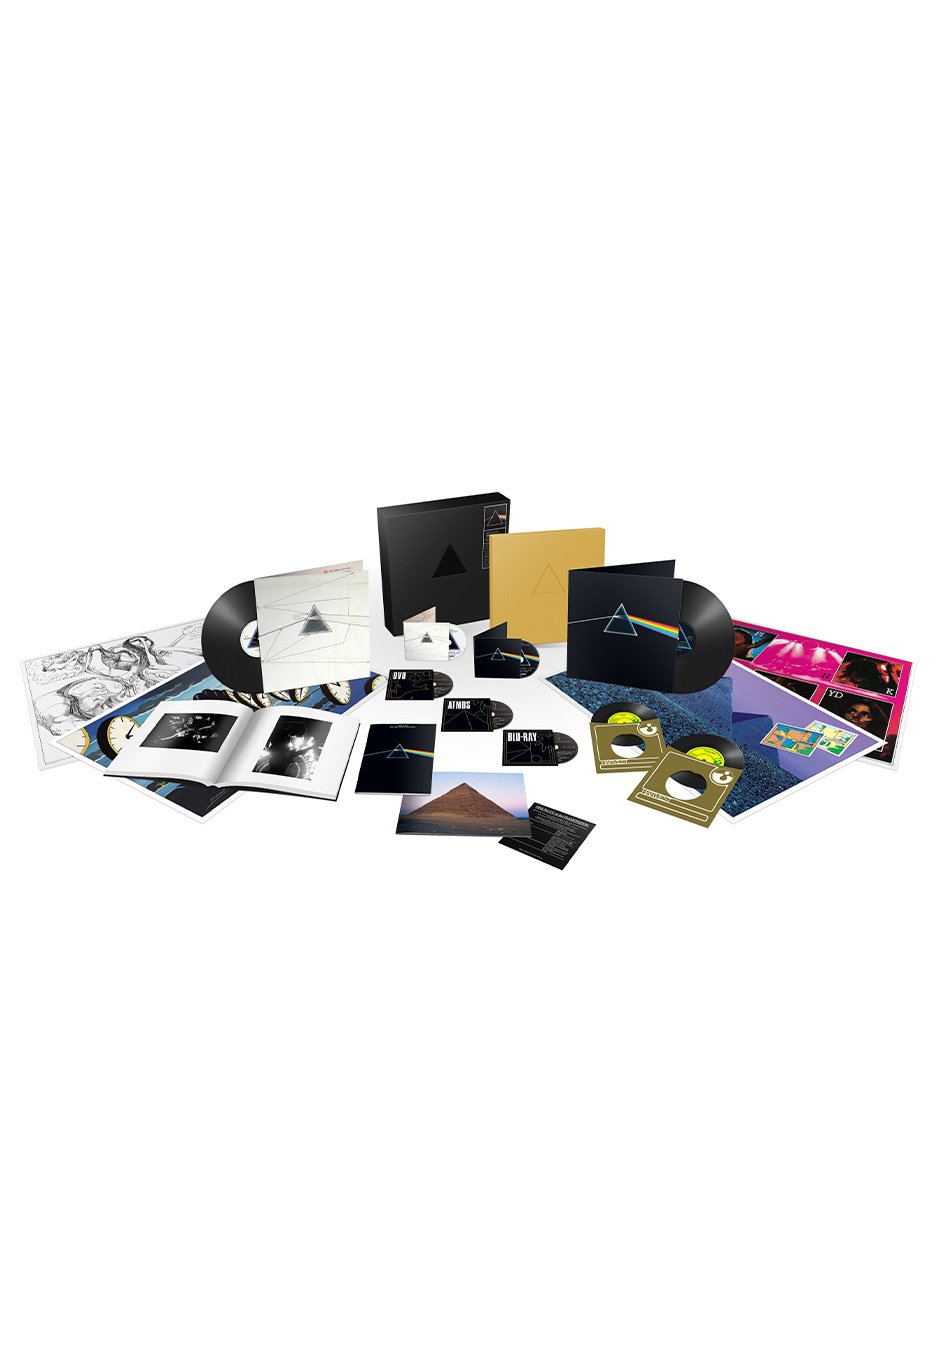 Pink Floyd - The Dark Side Of The Moon: 50th Anniversary Deluxe - Box Set